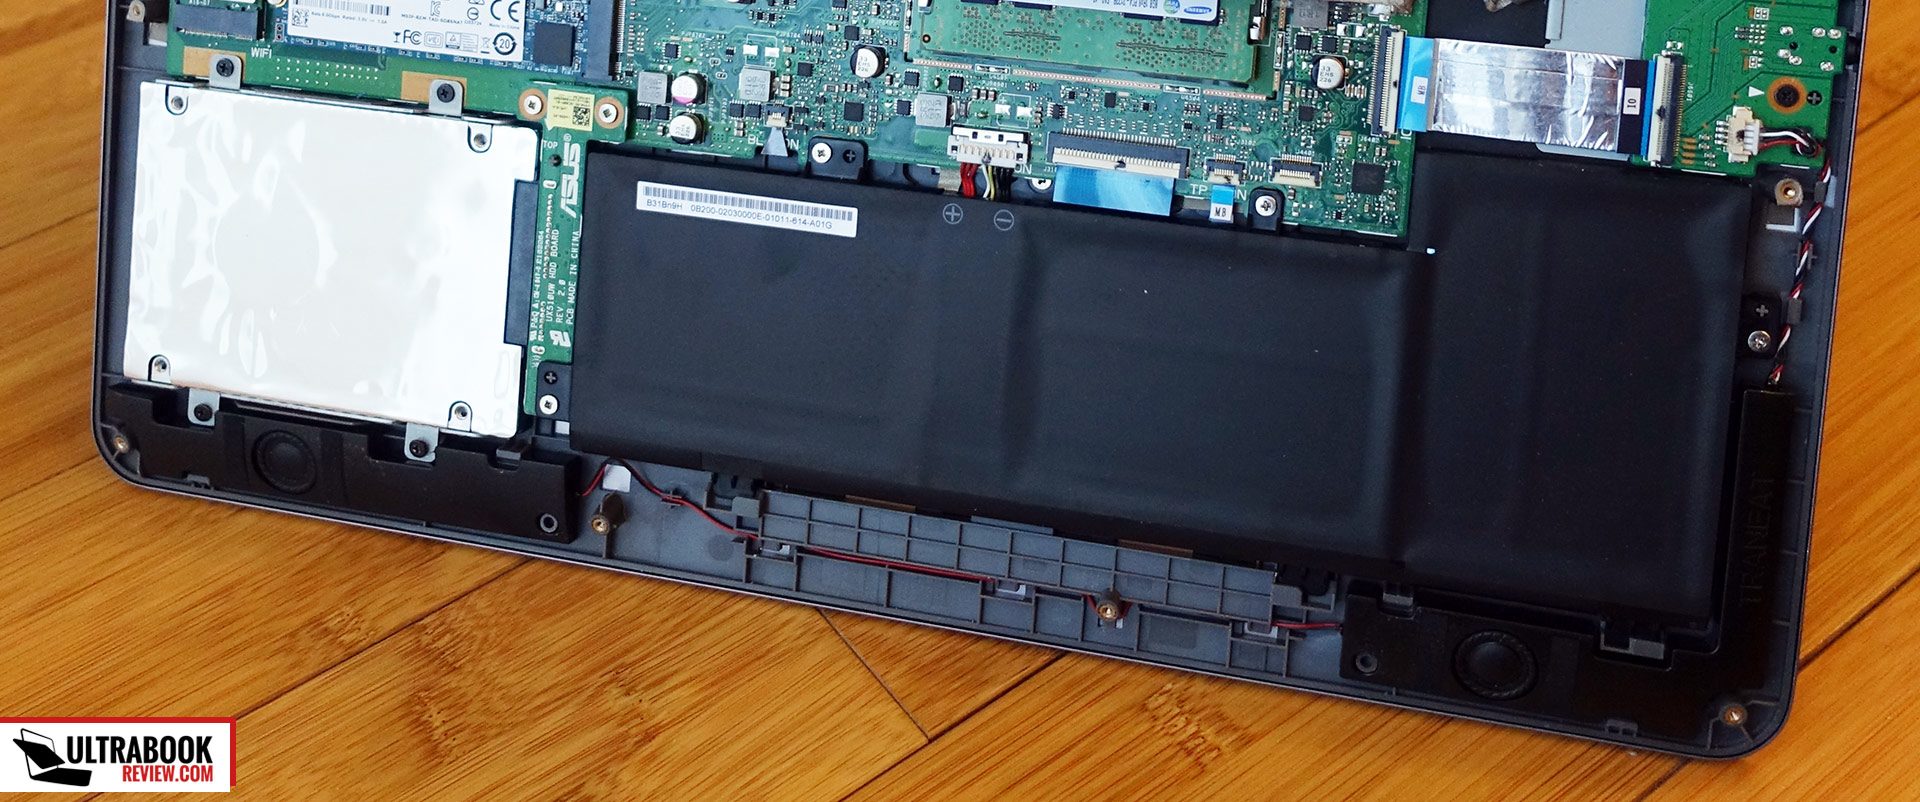 There's merely a 48 Wh battery on this laptop, as Asus chose to fill the extra space with a 2.5" storage bay